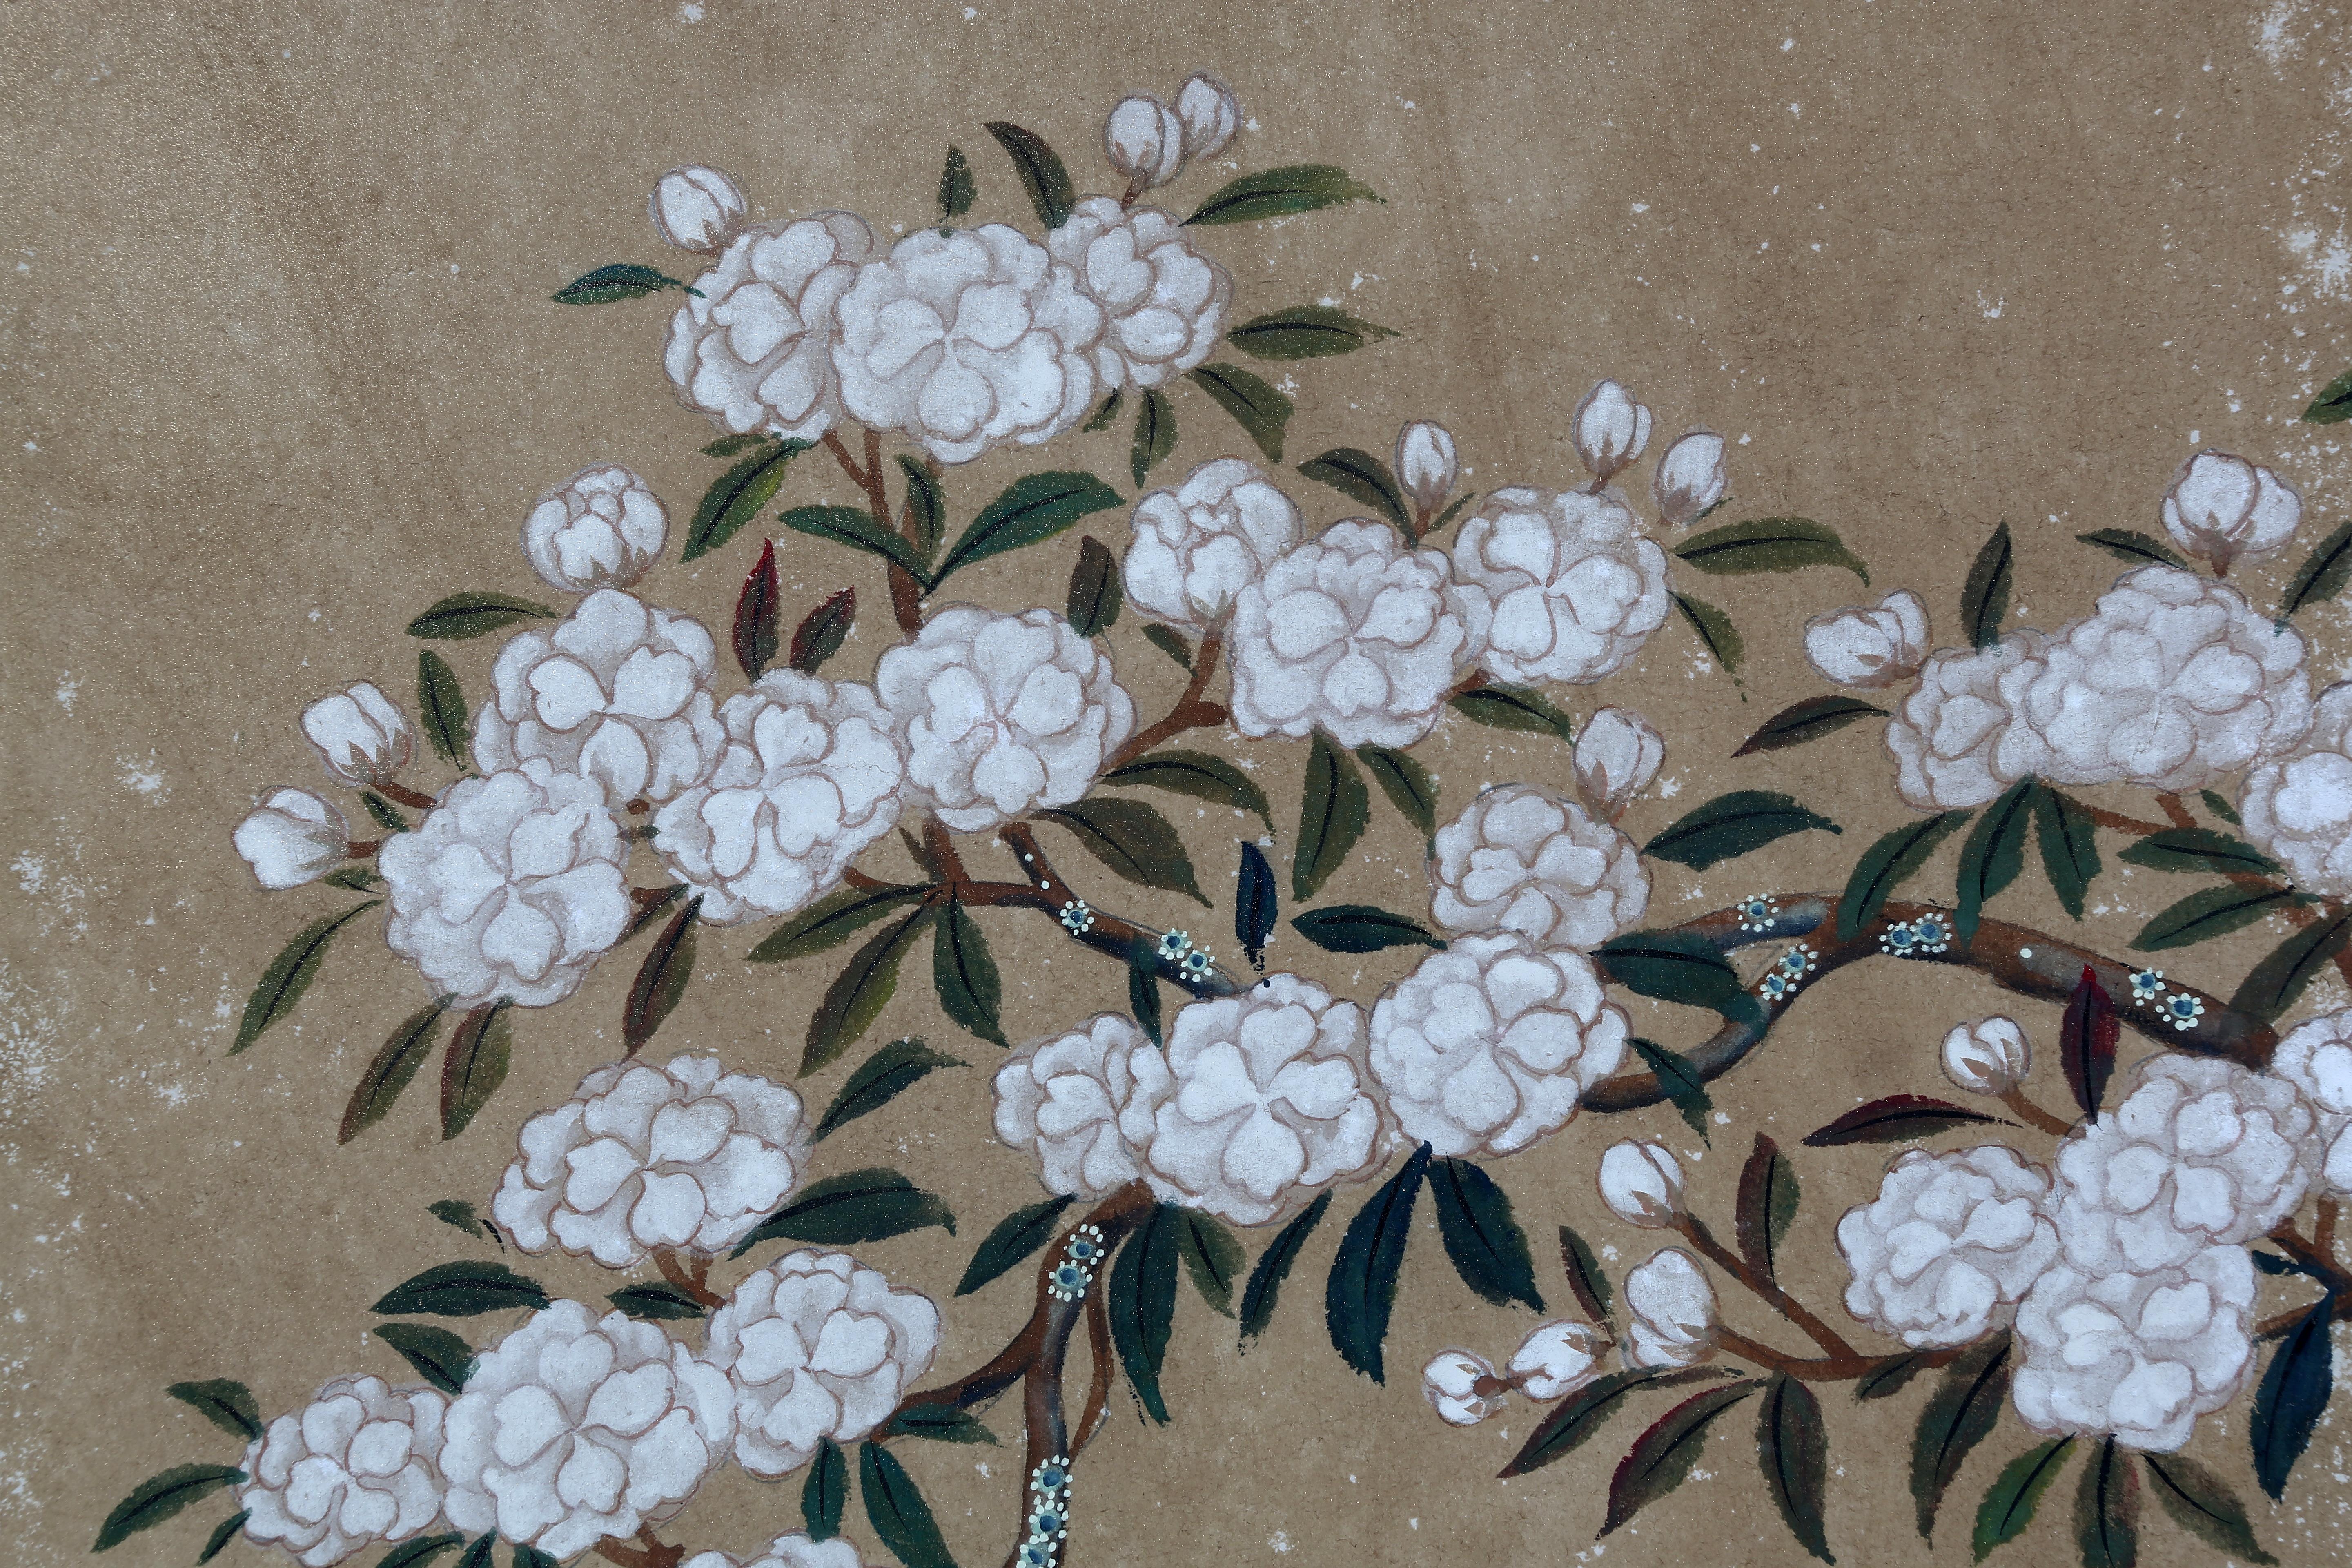 The white Sakura blossom painting of this six-panel screen is hand painted in watercolor, on rice paper over carefully jointed wooden lattice frames. Lacquer rails are then applied to the perimeter to finish the edges of the screen and provide